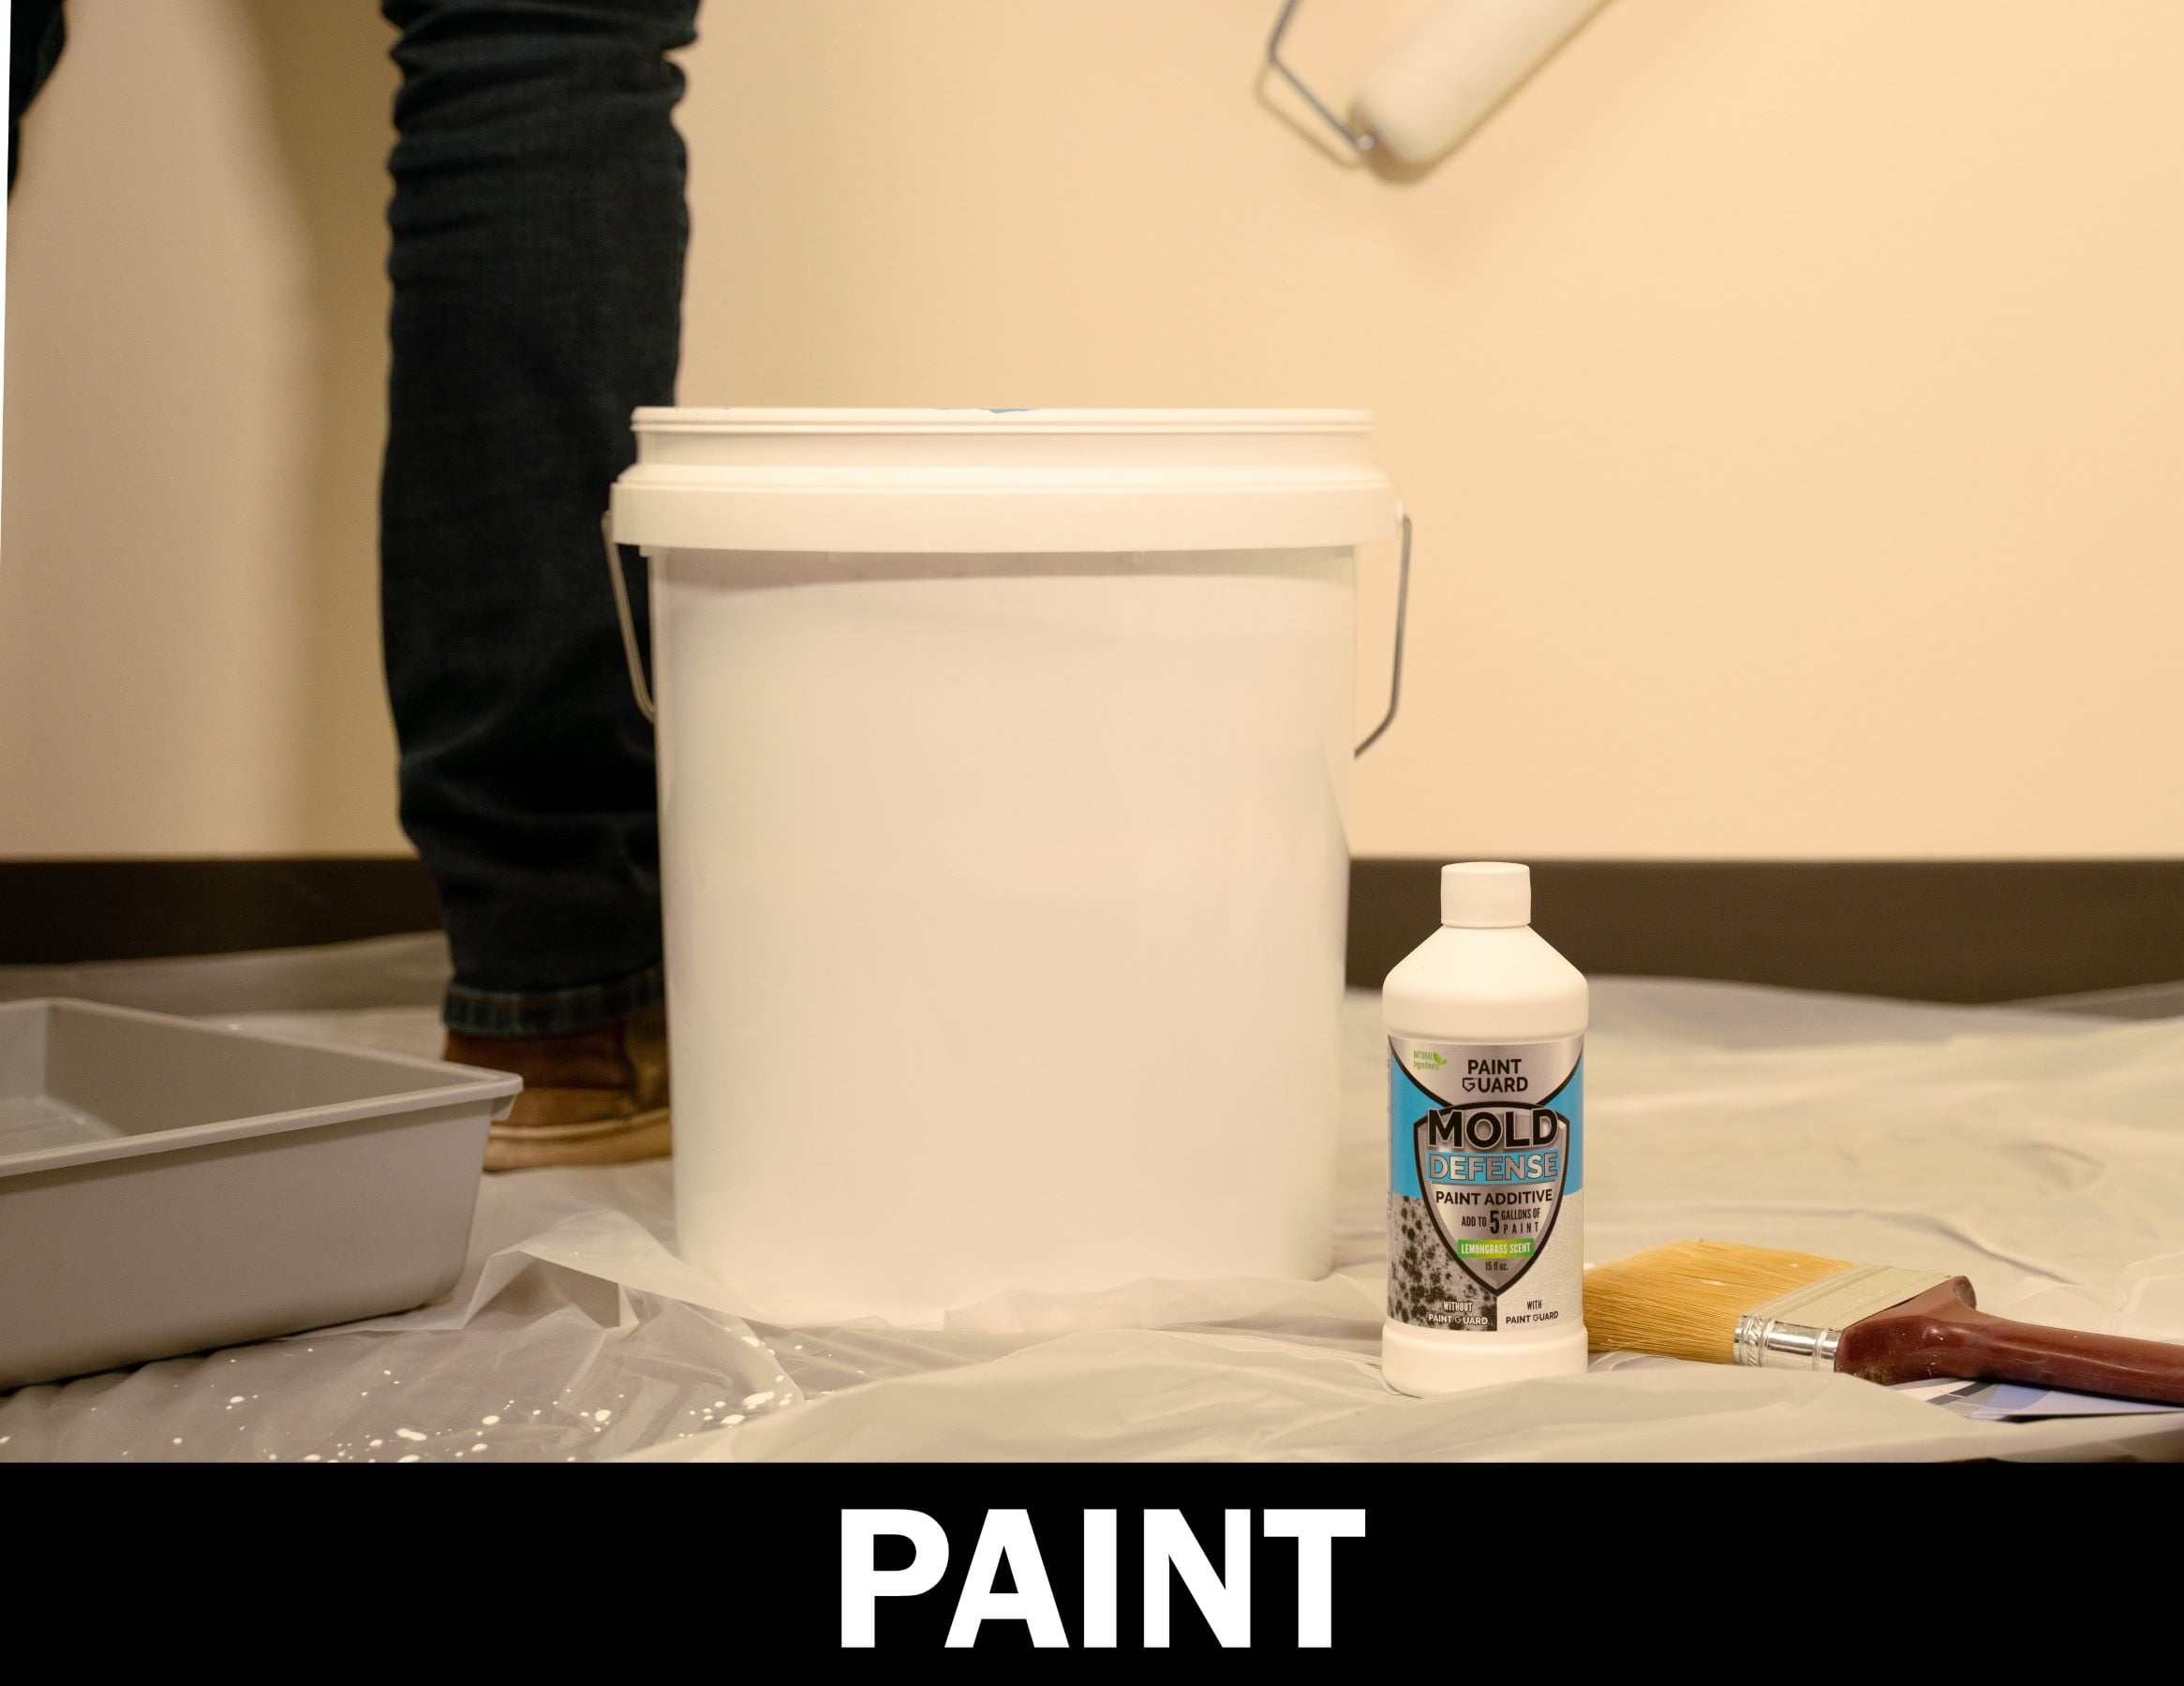 Paint-Guard Mold and Mildew Defense Paint Additive (1 Gallon Treatment)